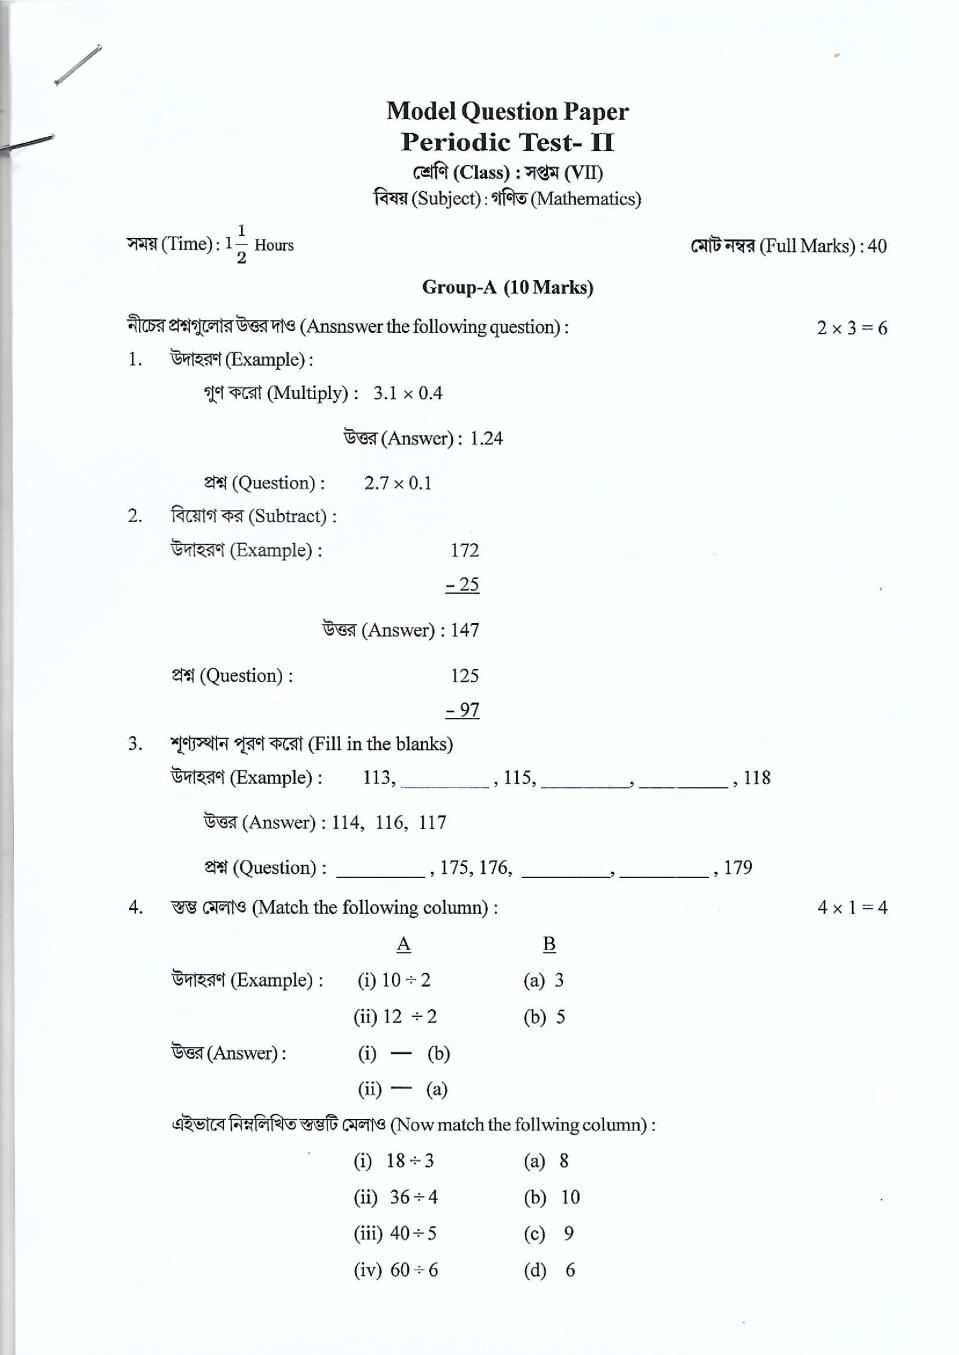 Tripura Board Model Question Paper for Class 7 Annual Exam - Page 1